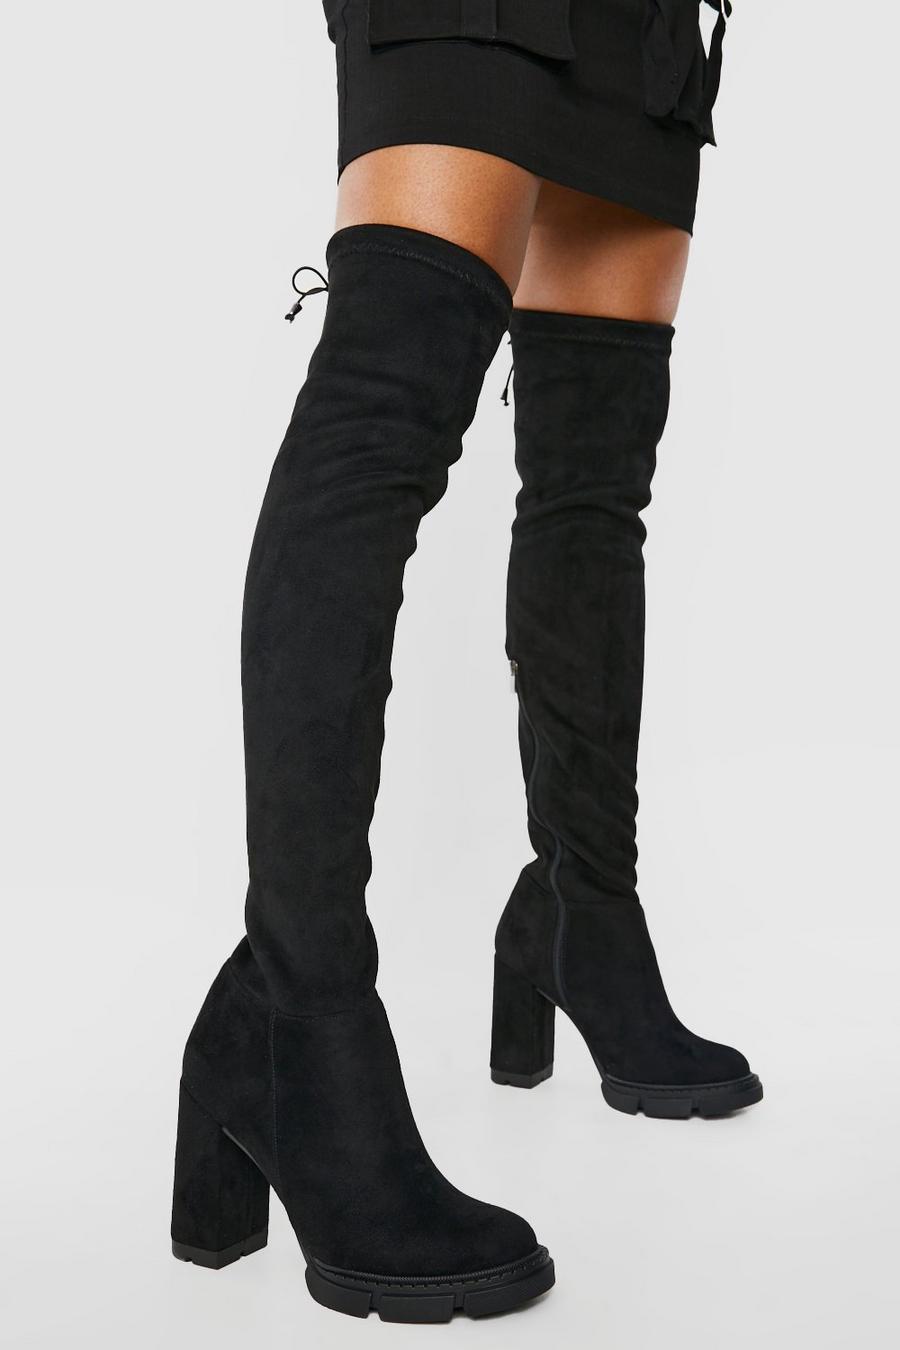 Black Cleated Platform Stretch Over The Knee Boots image number 1